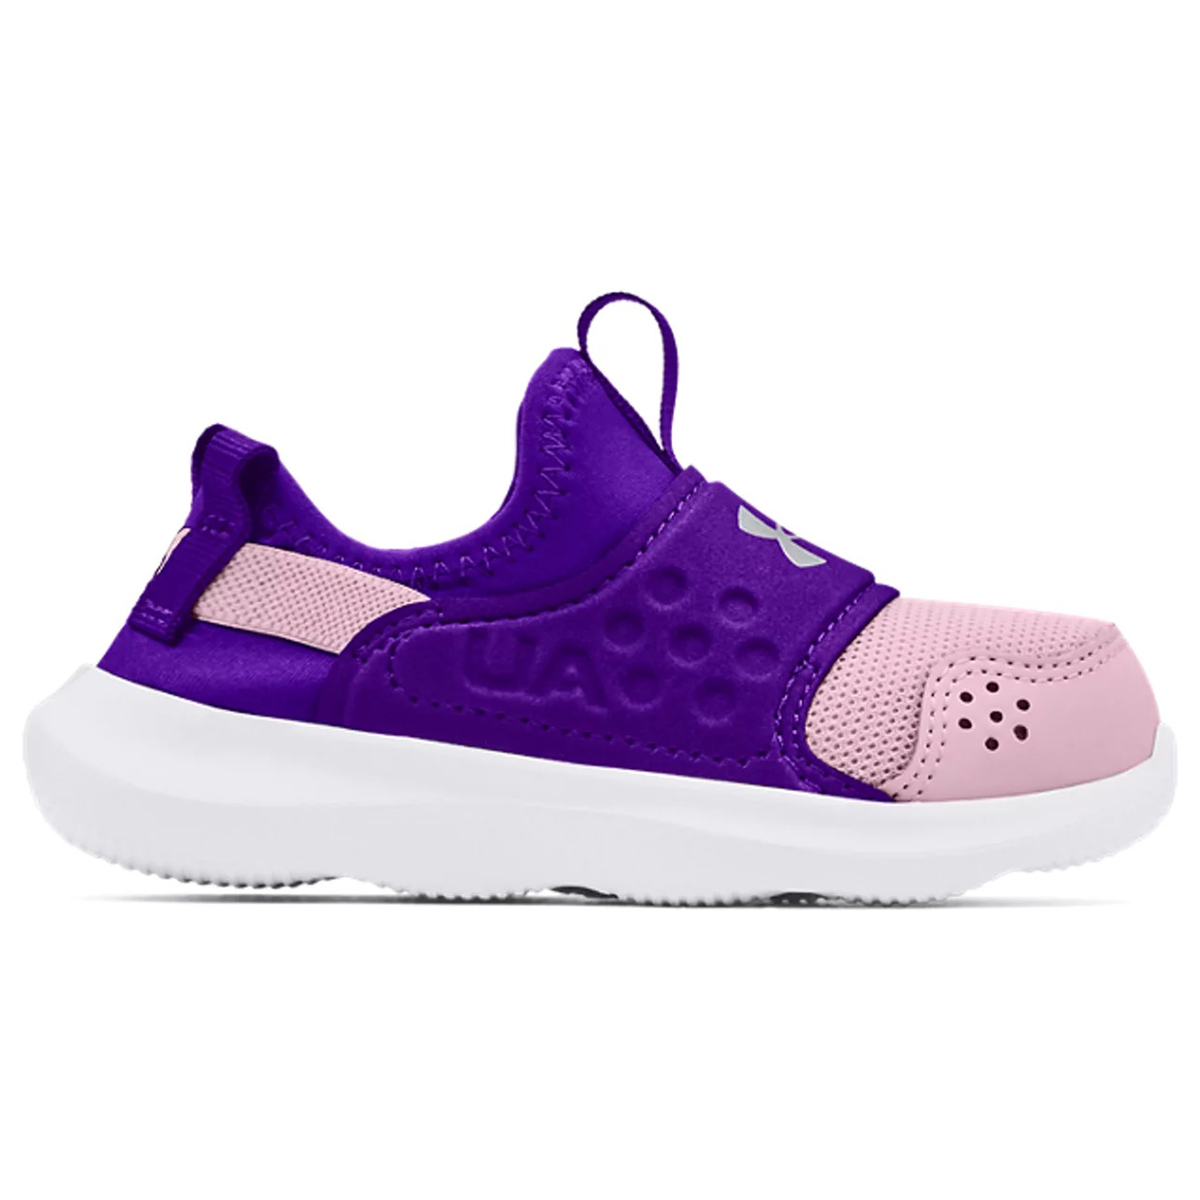 Under Armour Girls' Infant Ua Runplay Shoes